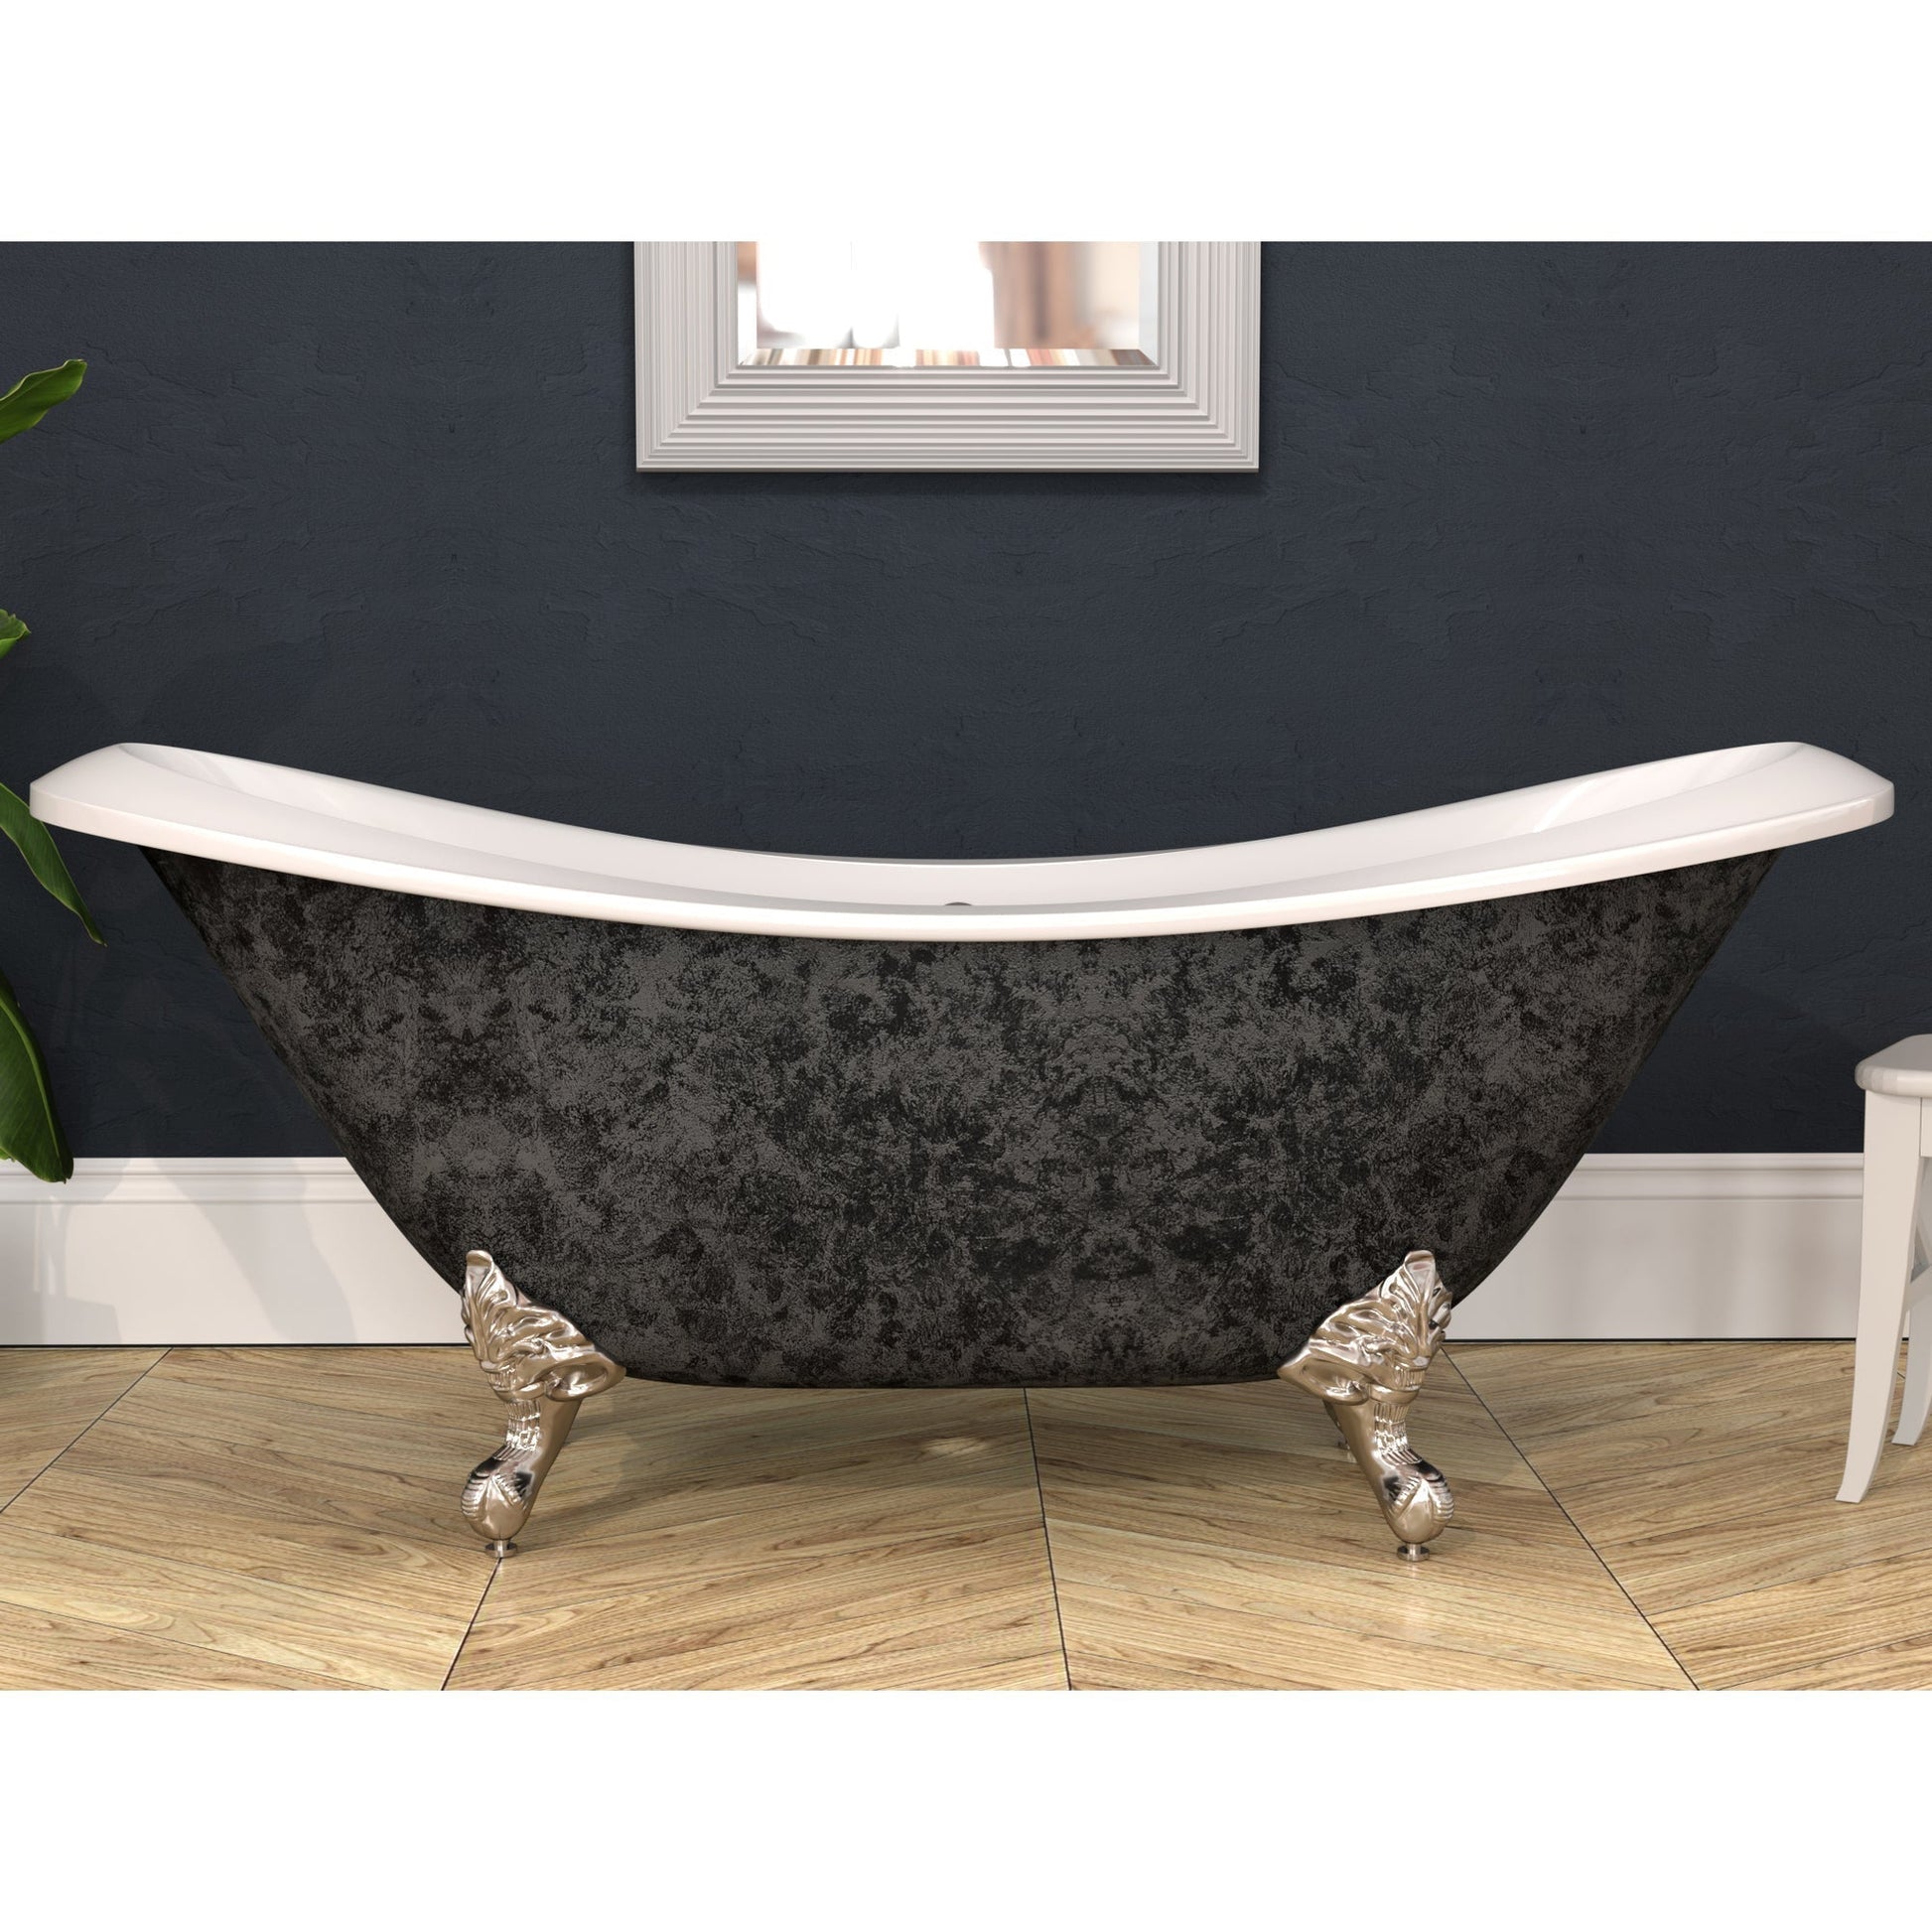 Cambridge Plumbing 73" Hand Painted Scorched Platinum Double Slipper Clawfoot Acrylic Bathtub With No Faucet Holes With Brushed Nickel Clawfeet